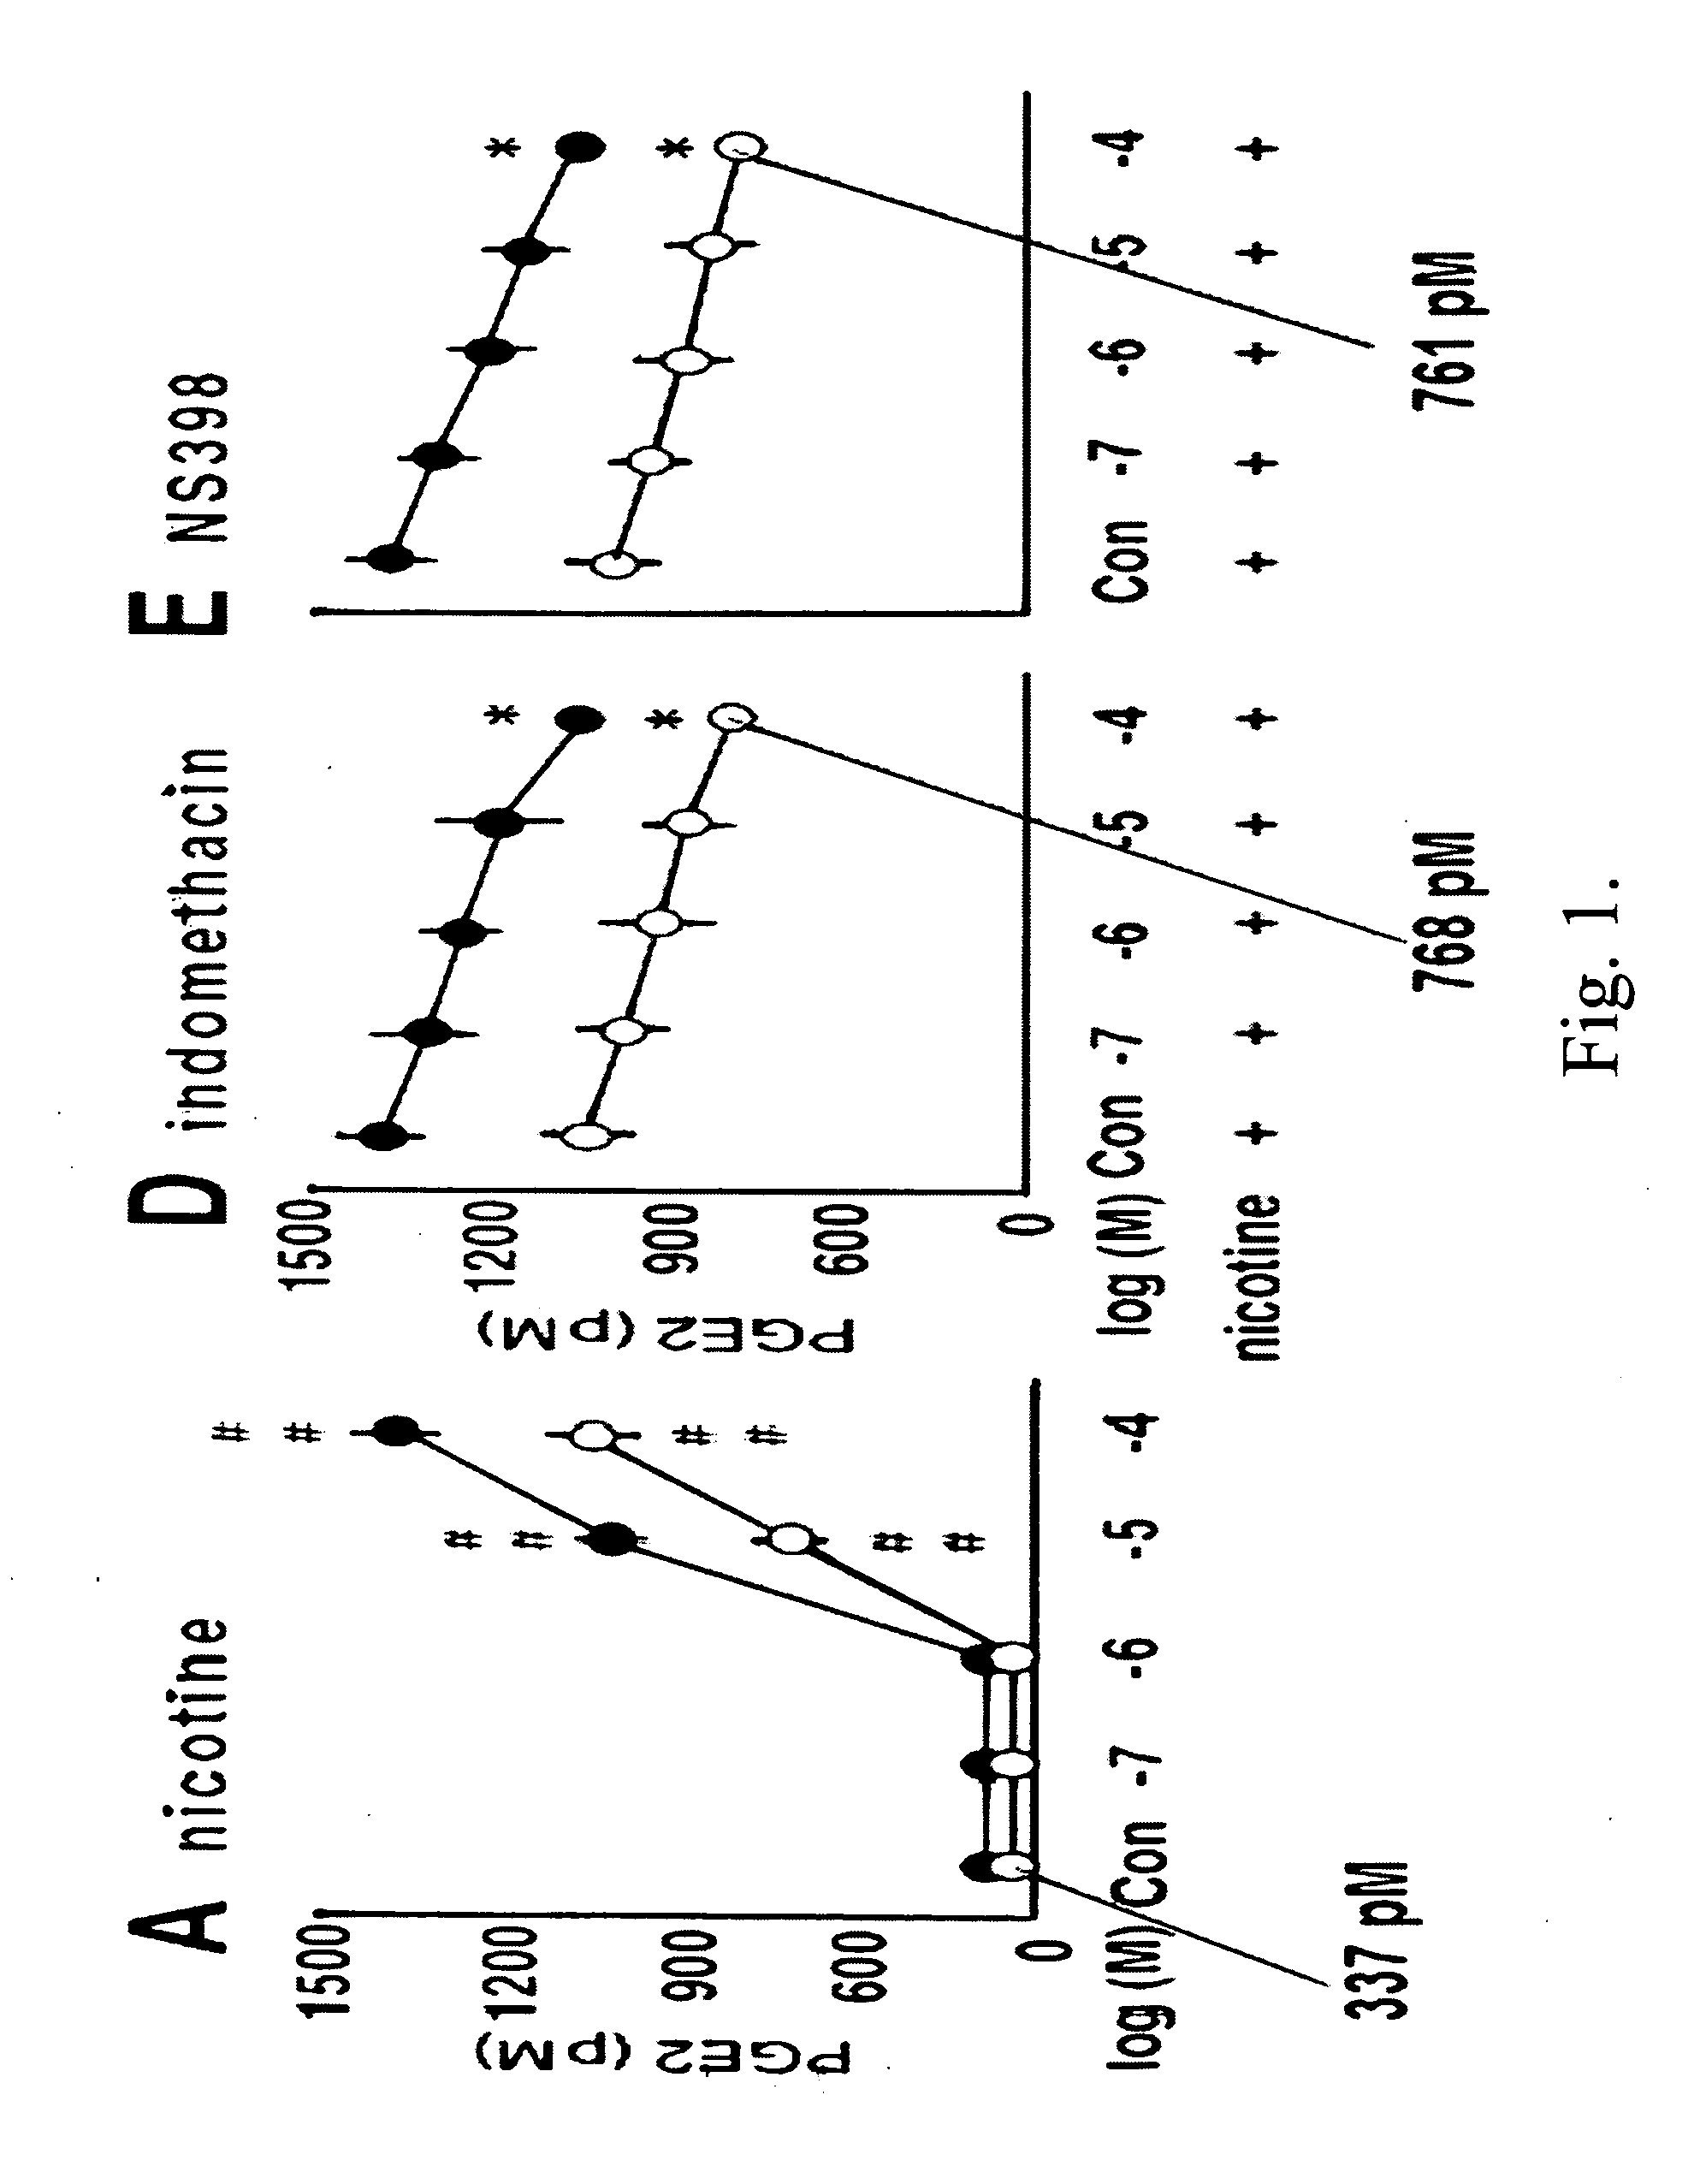 Method for mitigating of Prostaglandin E2 reducing side effects of non-steroidal anti-inflammatory drugs